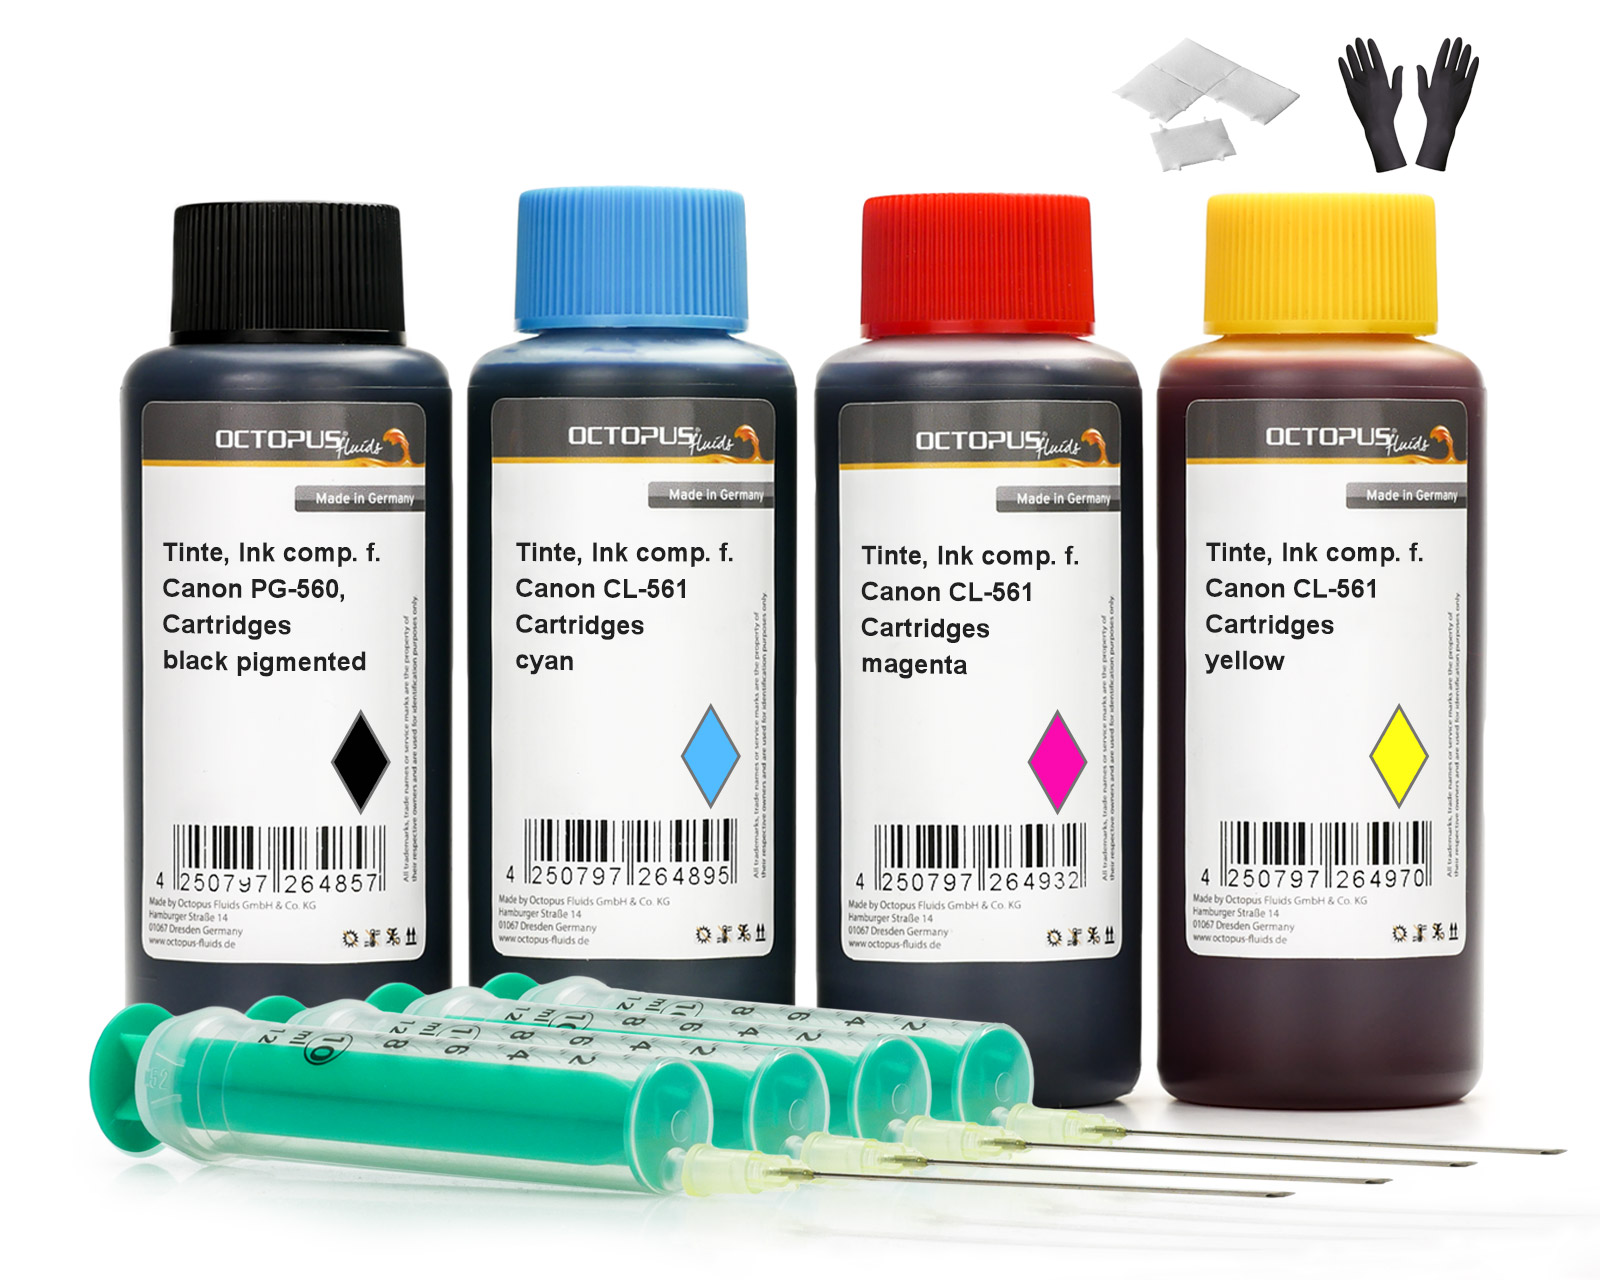 
Octopus printer ink set compatible for Canon PG-560, CL-561 ink cartridges, Canon Pixma TS 5300, 7400